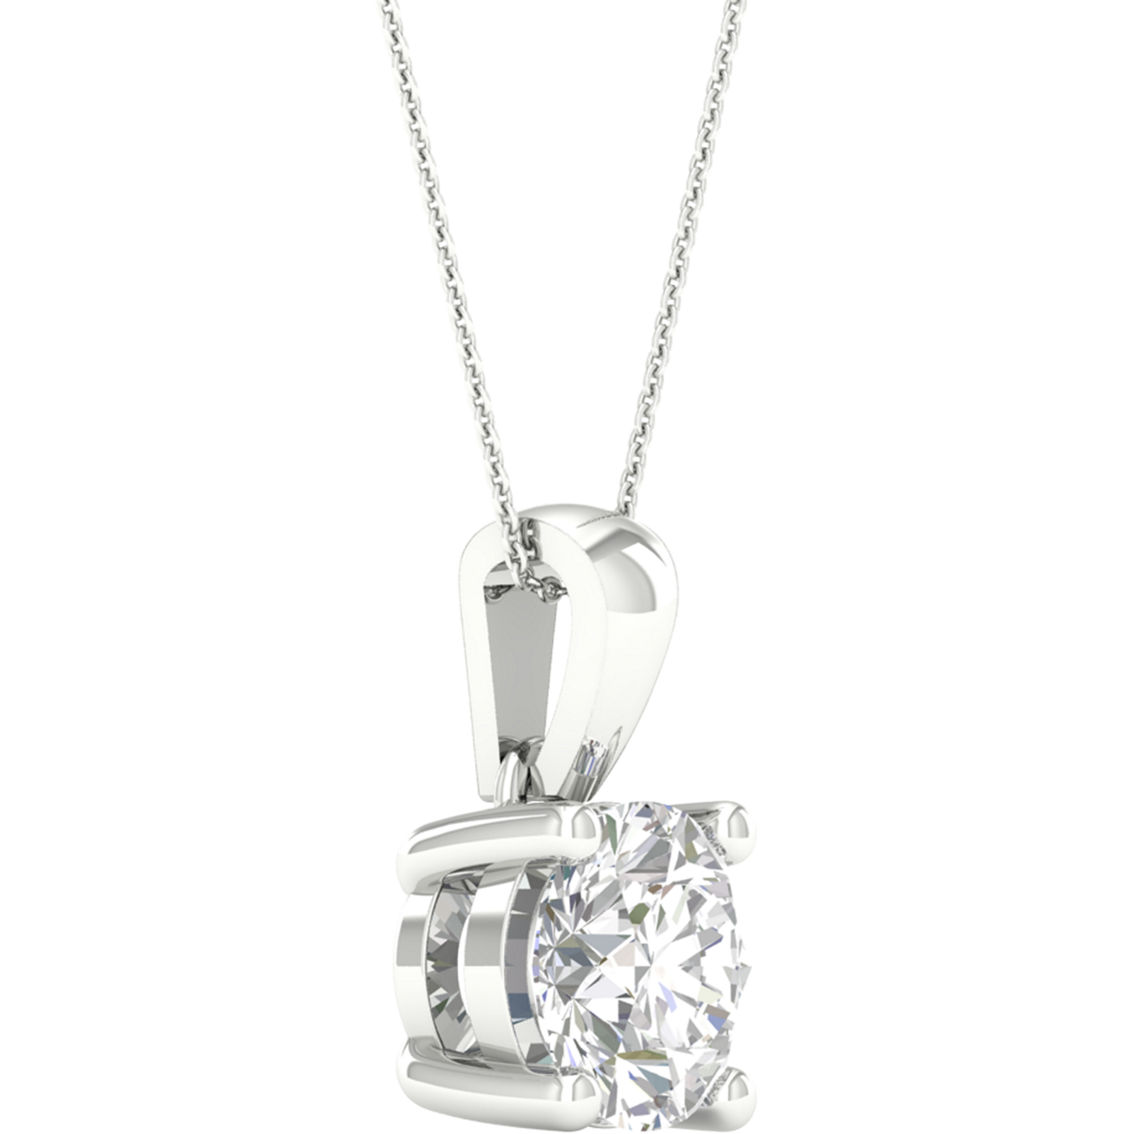 Pure Brilliance 14K White Gold 1 1/2 CTW Solitaire Pendant with IGI Certification - Image 2 of 2